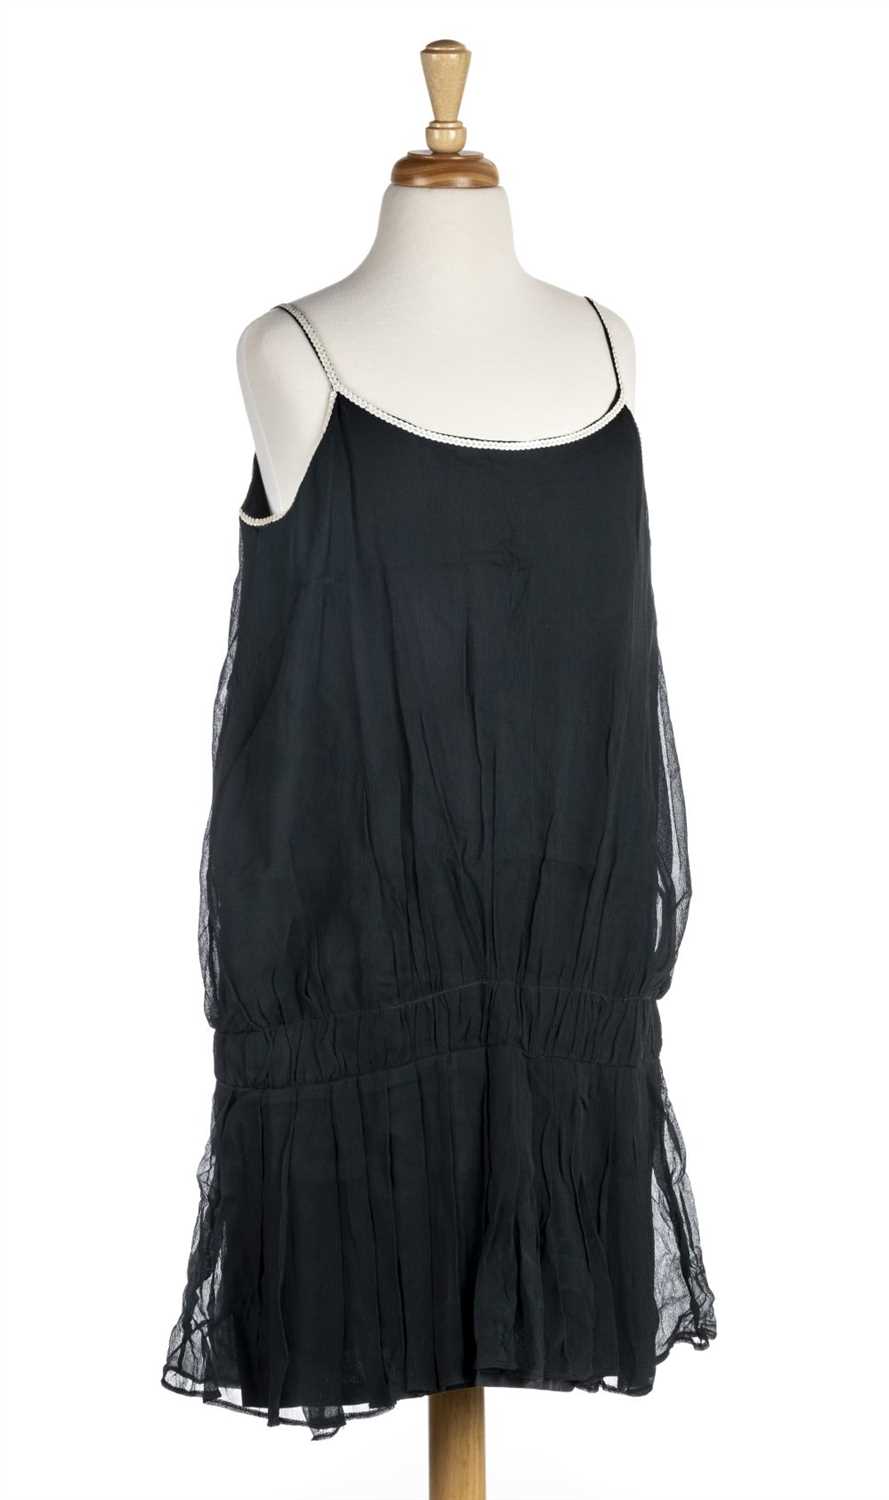 Lot 173 - Mary Quant. A black evening mini-dress, Ginger Group, mid-late 1960s